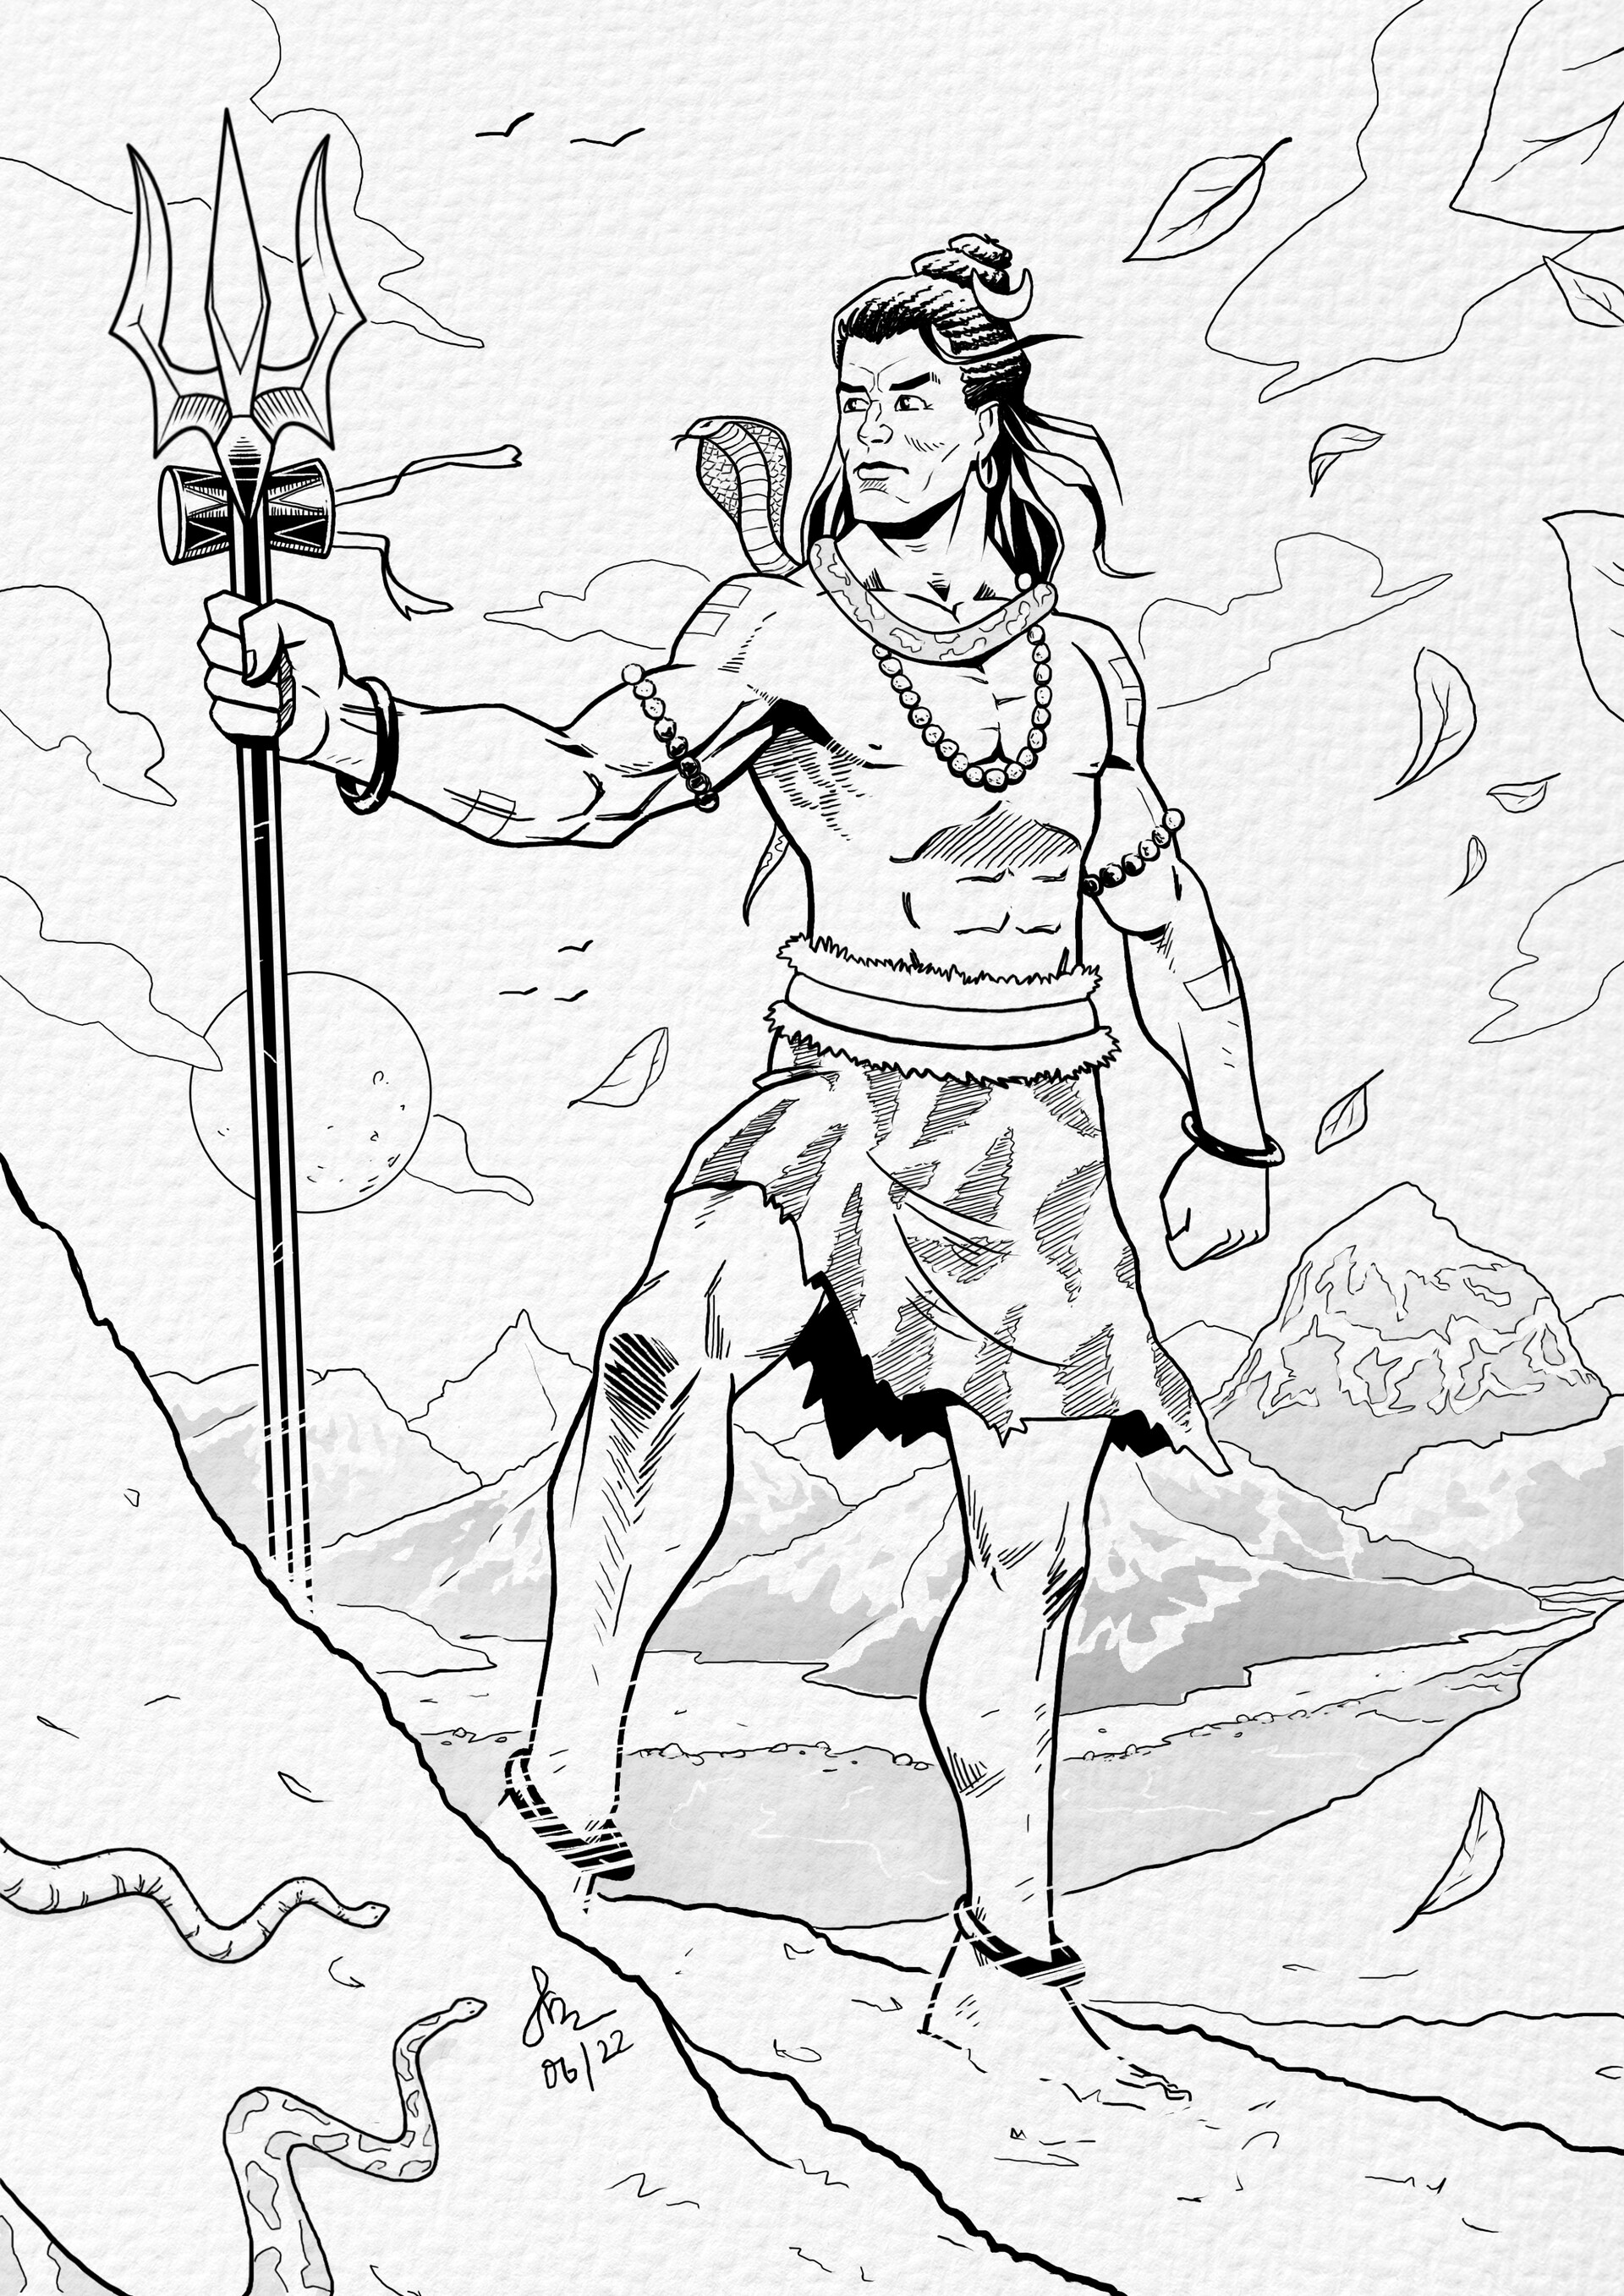 Student Drawing.... lord shiva drawing... - 𝐵𝒾𝓈𝓌𝒶𝒿𝒾𝓉 𝒜𝓇𝓉  𝒲𝑜𝓇𝓀 | Facebook